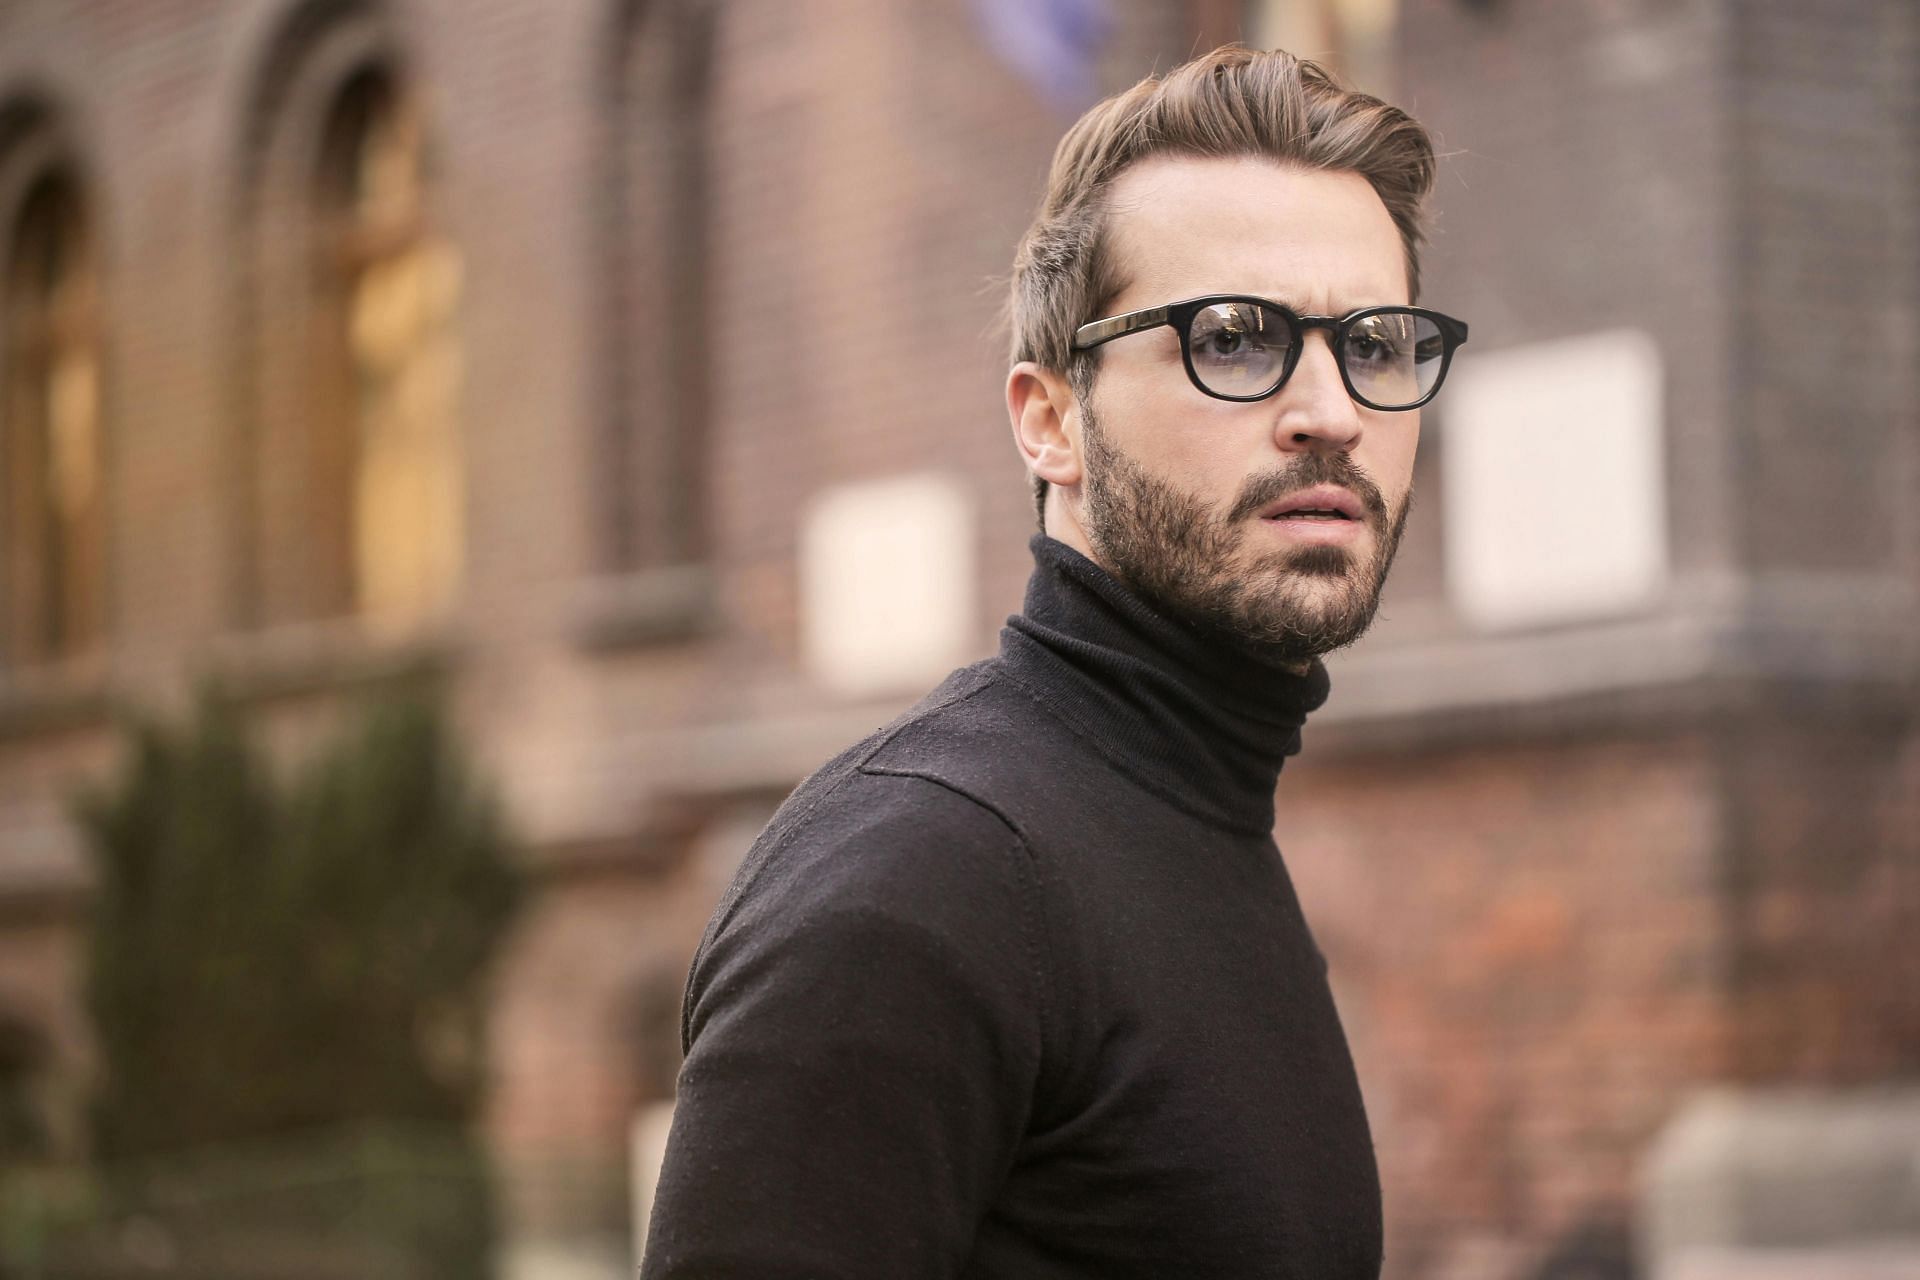 Tips to grow beard faster(image sourced via Pexels / Photo by andrea)